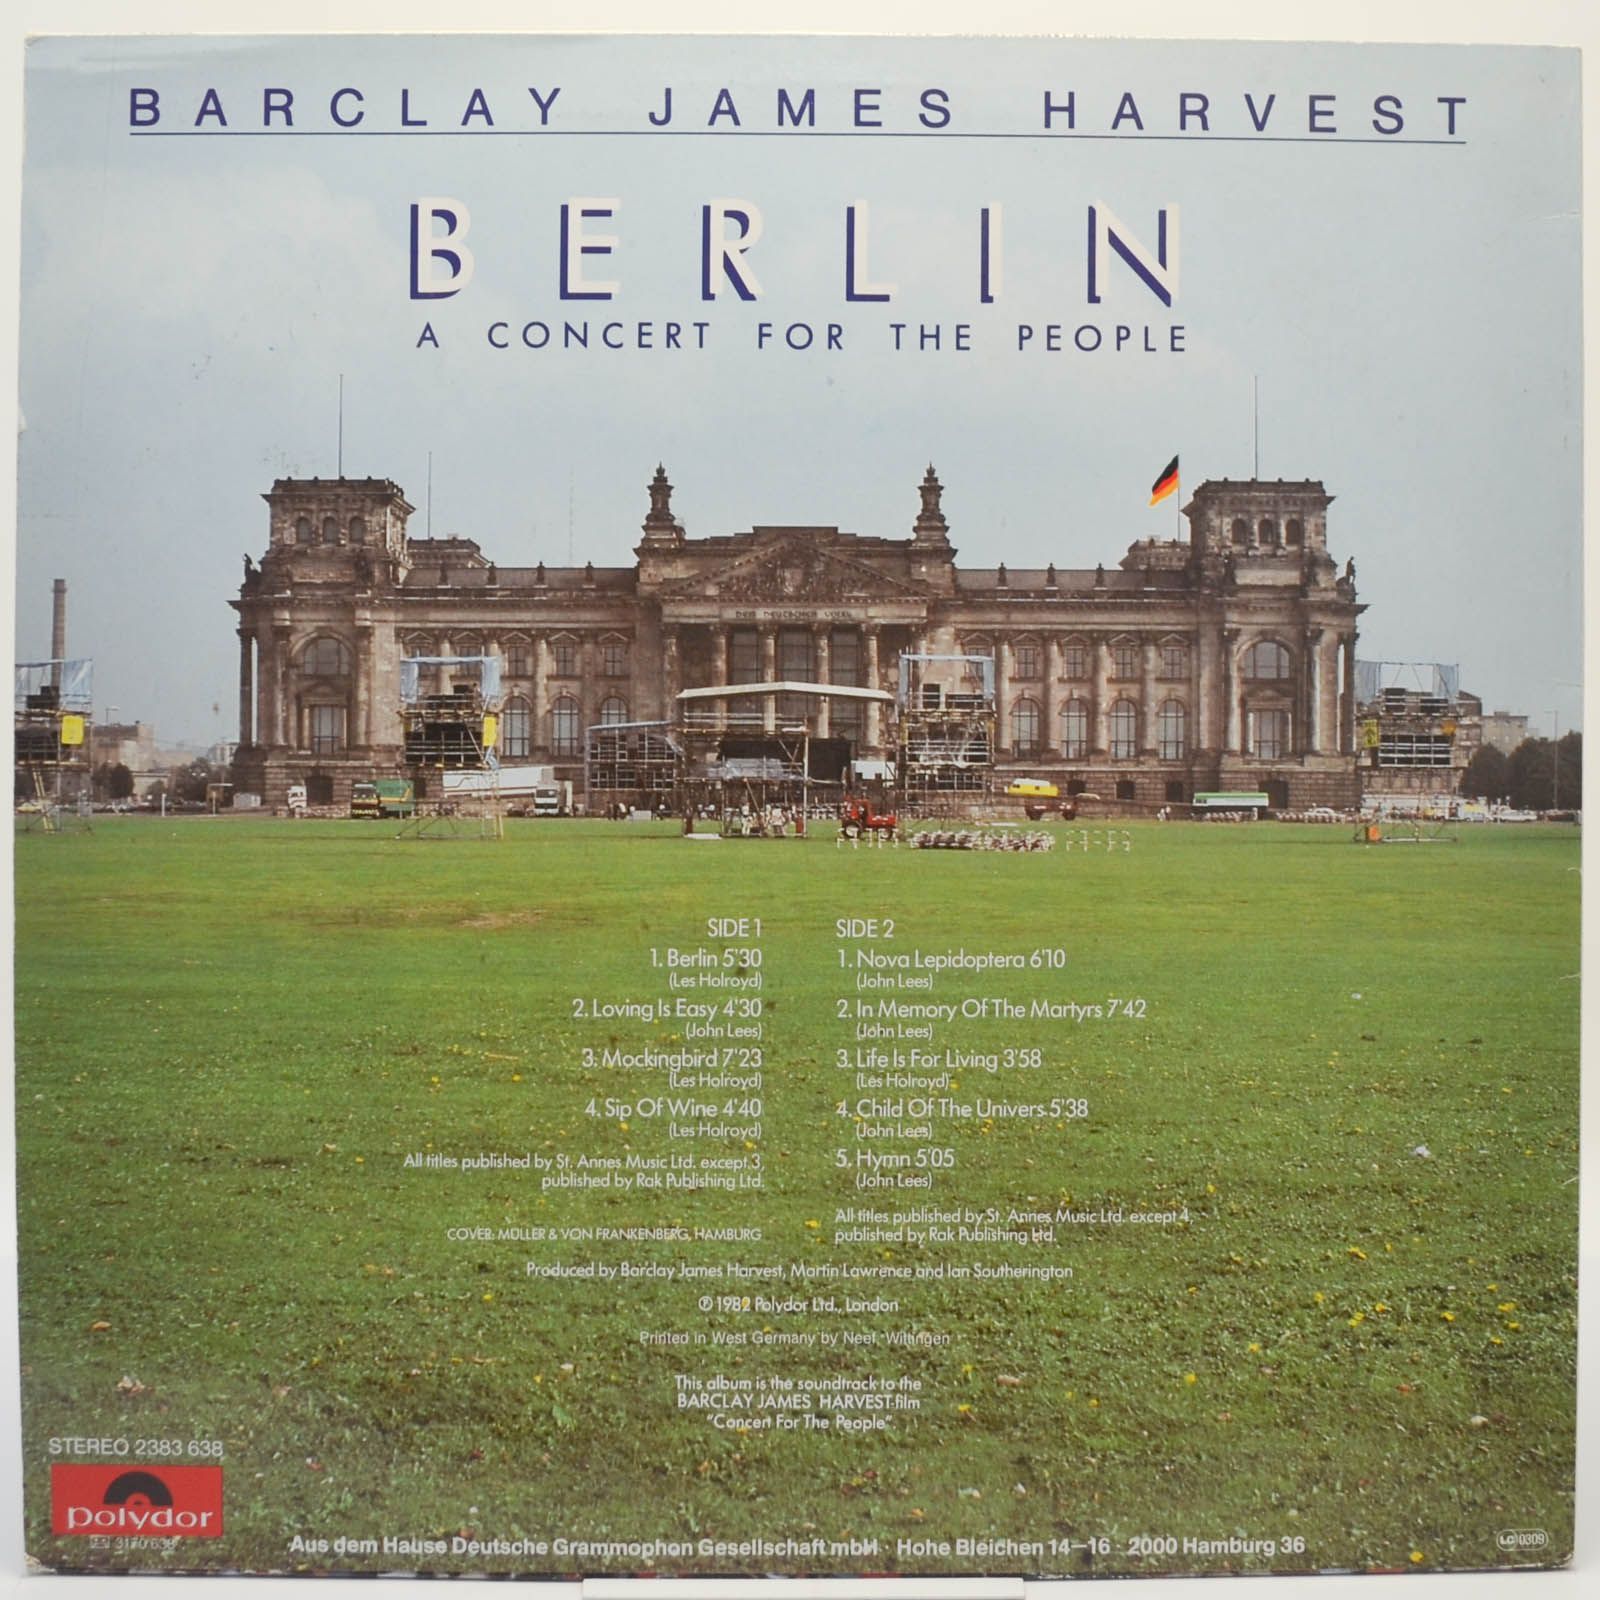 Barclay James Harvest — Berlin - A Concert For The People, 1982